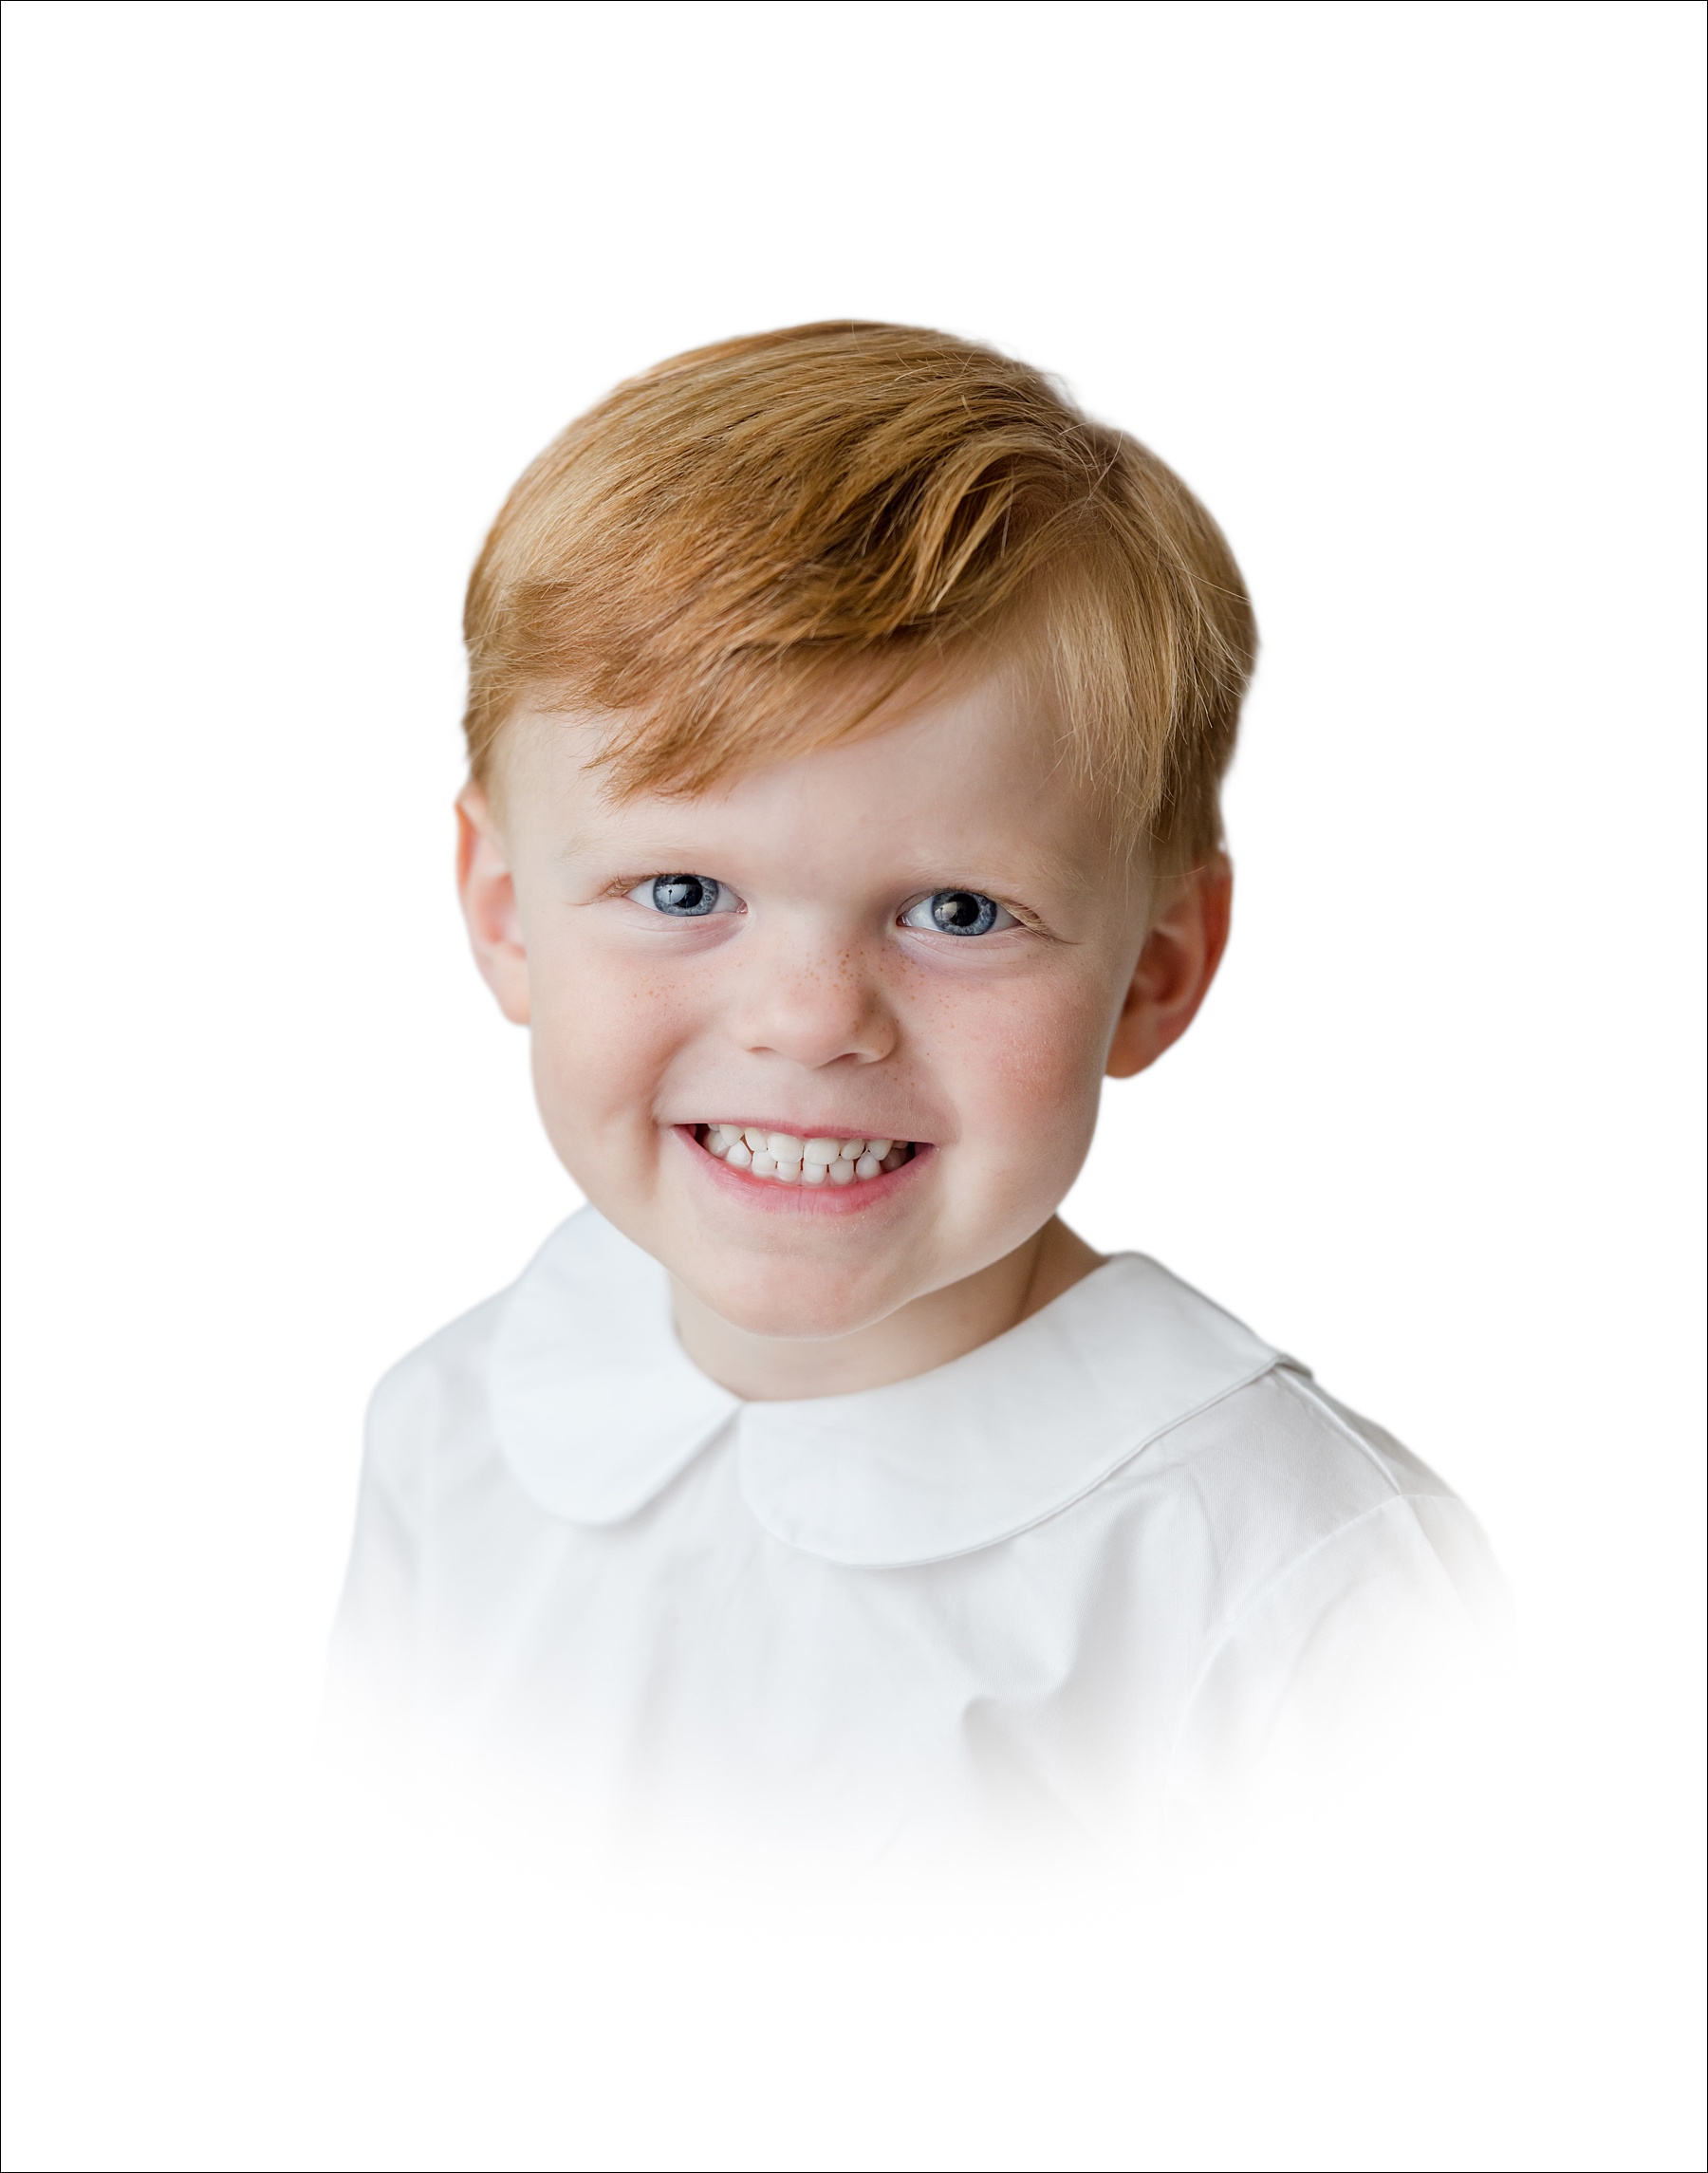 South Carolina heirloom portraits with a white vignette of a red headed young boy.